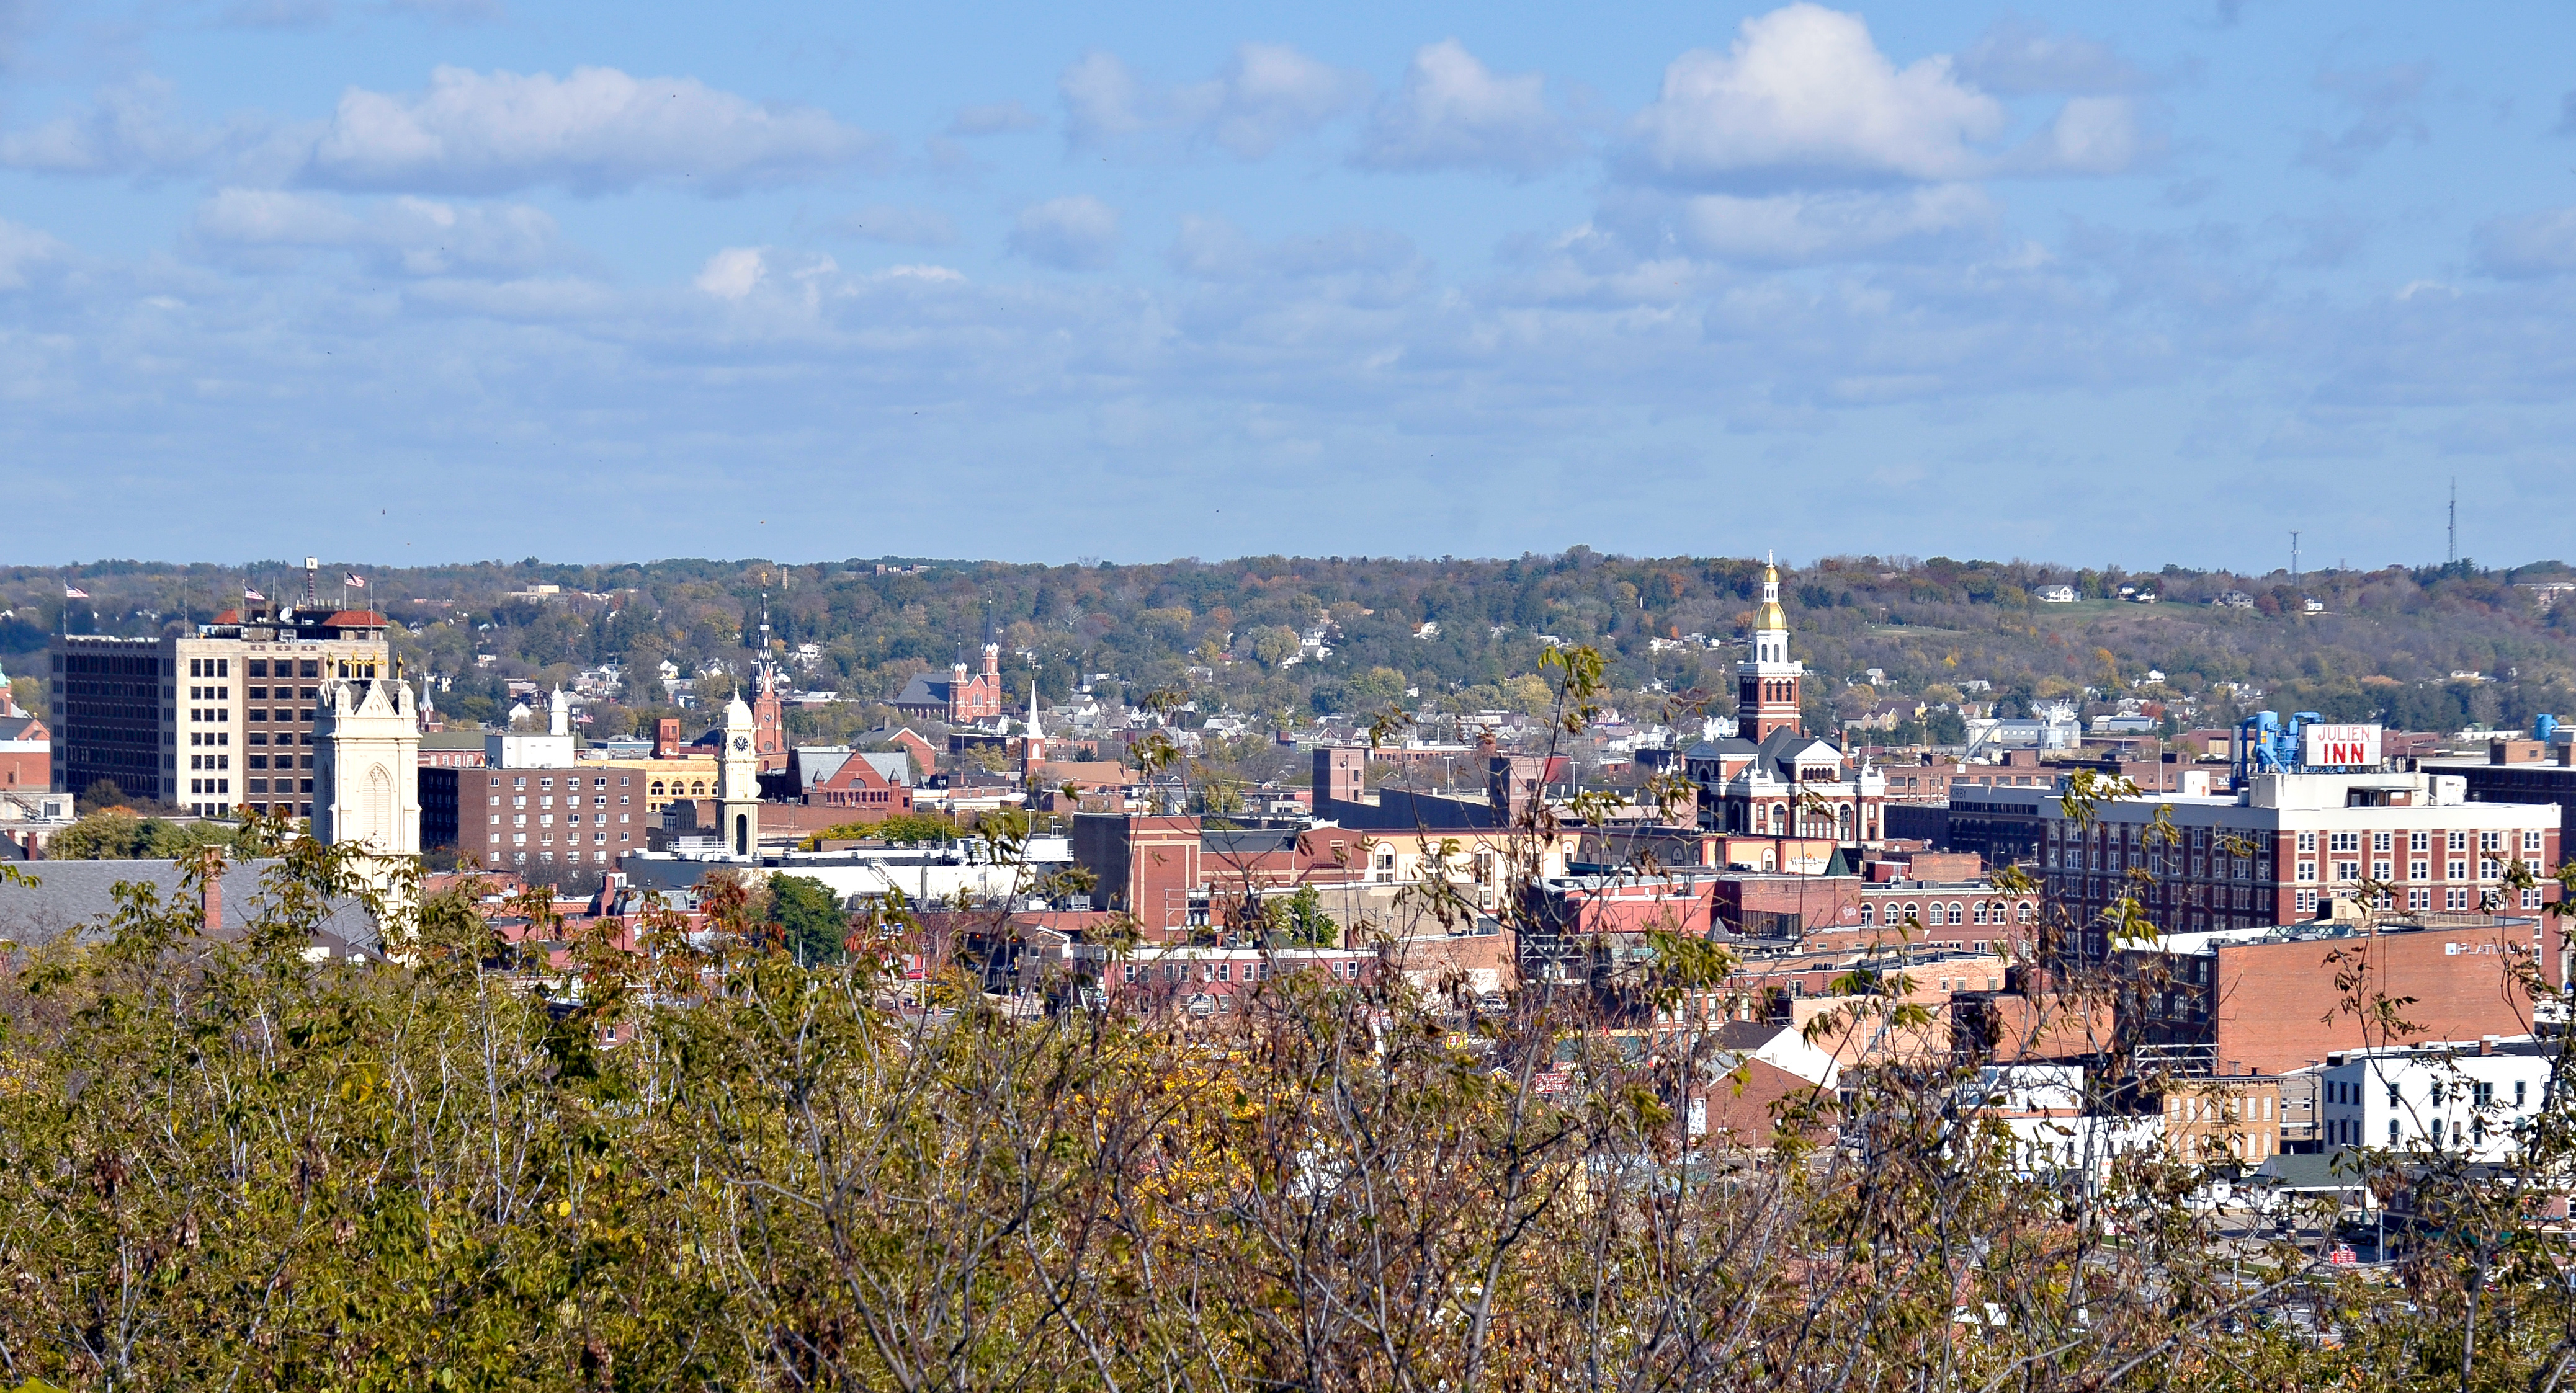 Dubuque ( , dəb-YOOK) is a city in and the county seat of Dubuque County, Iowa, United States, located along the Mississippi River. At the time of the 2020 census, the population of Dubuque was 59,667. The city lies at the junction of Iowa, Illinois, and Wisconsin, a region locally known as the Tri-State Area. It serves as the main commercial, industrial, educational, and cultural center for the area. Geographically, it is part of the Driftless Area, a portion of North America that escaped all three phases of the Wisconsin Glaciation.
Dubuque is a regional tourist destination featuring the city's unique architecture, casinos and river location. It is home to five institutions of higher education. Dubuque has historically been a center of manufacturing, the local economy also includes health care, publishing, and financial service sectors.